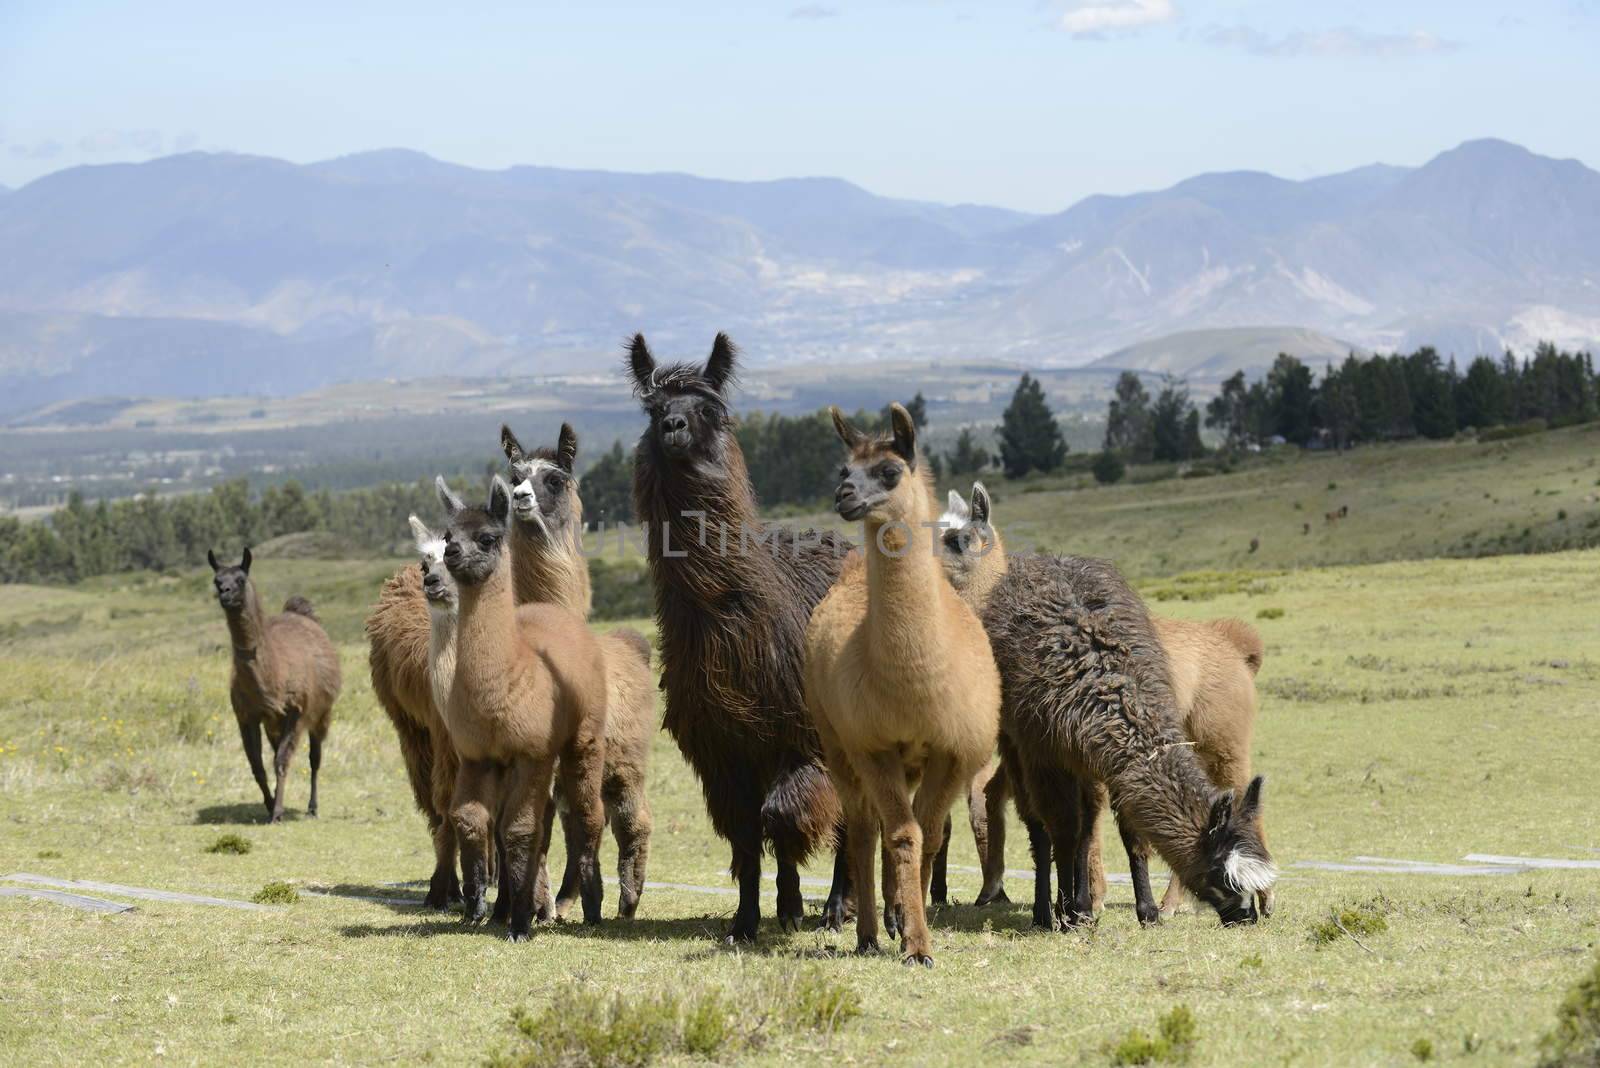 Llamas family on the field. by kertis